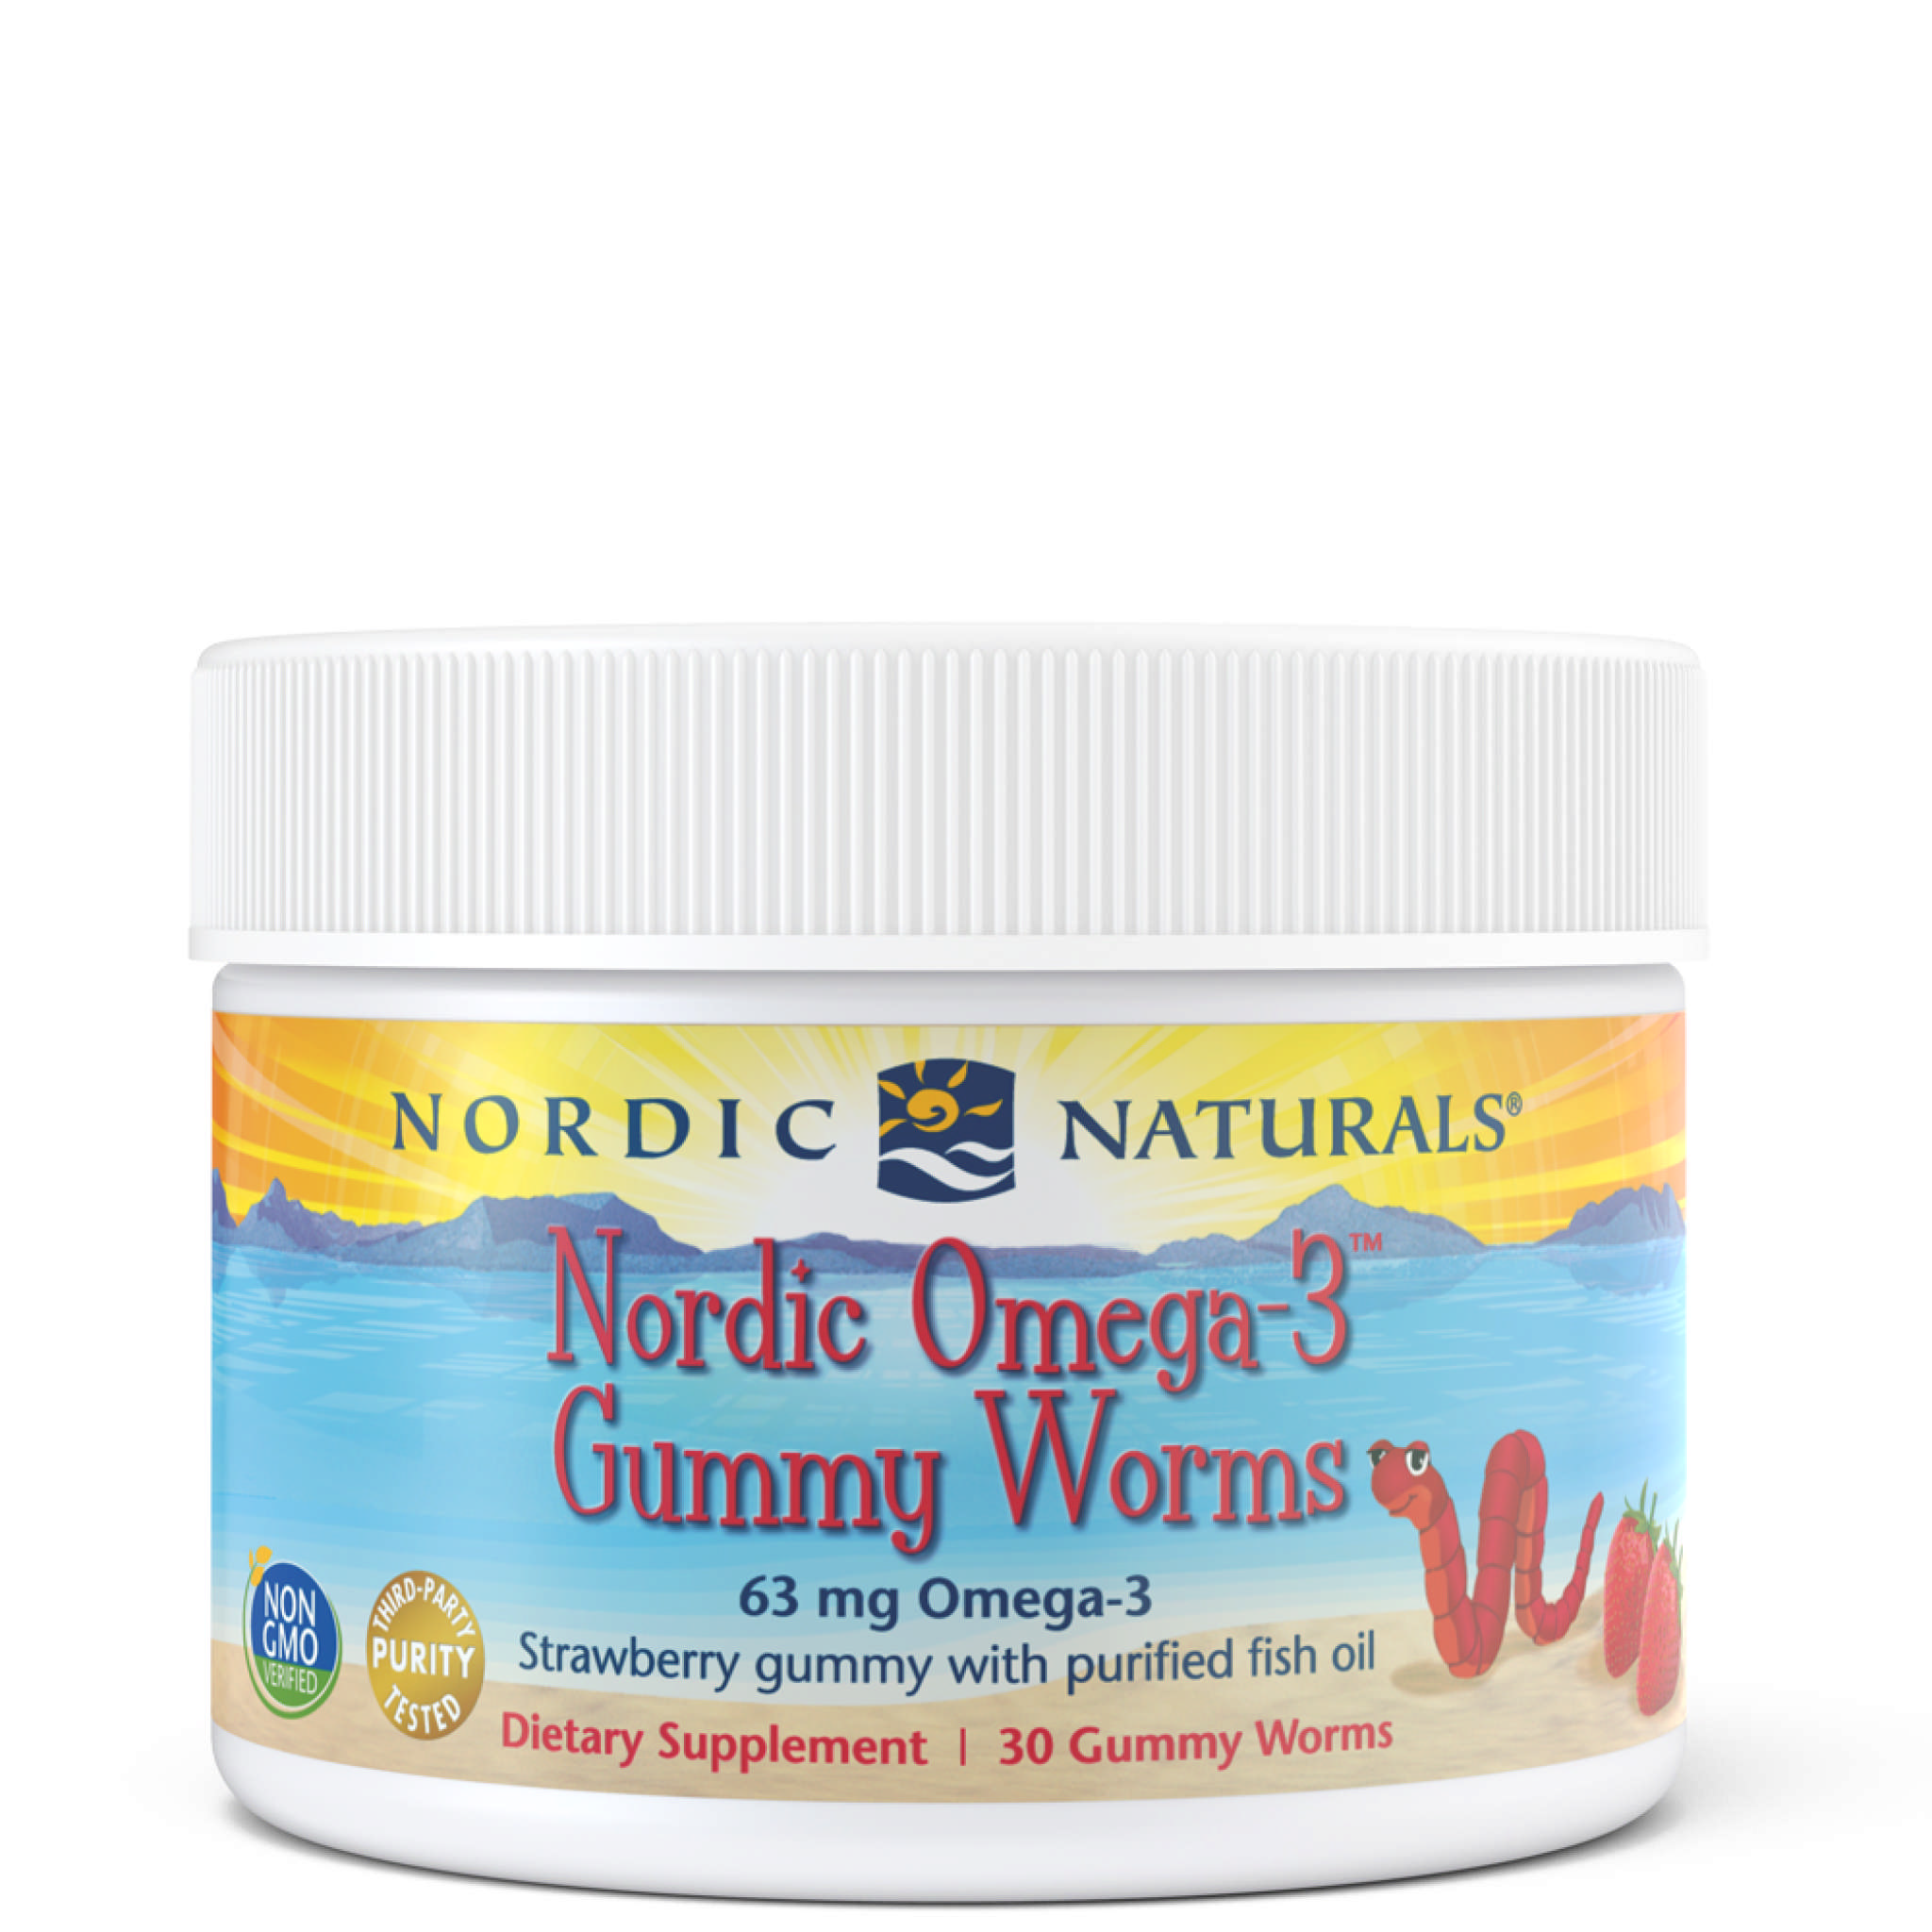 Nordic Naturals - Omega 3 Gummy Worms Strawberry